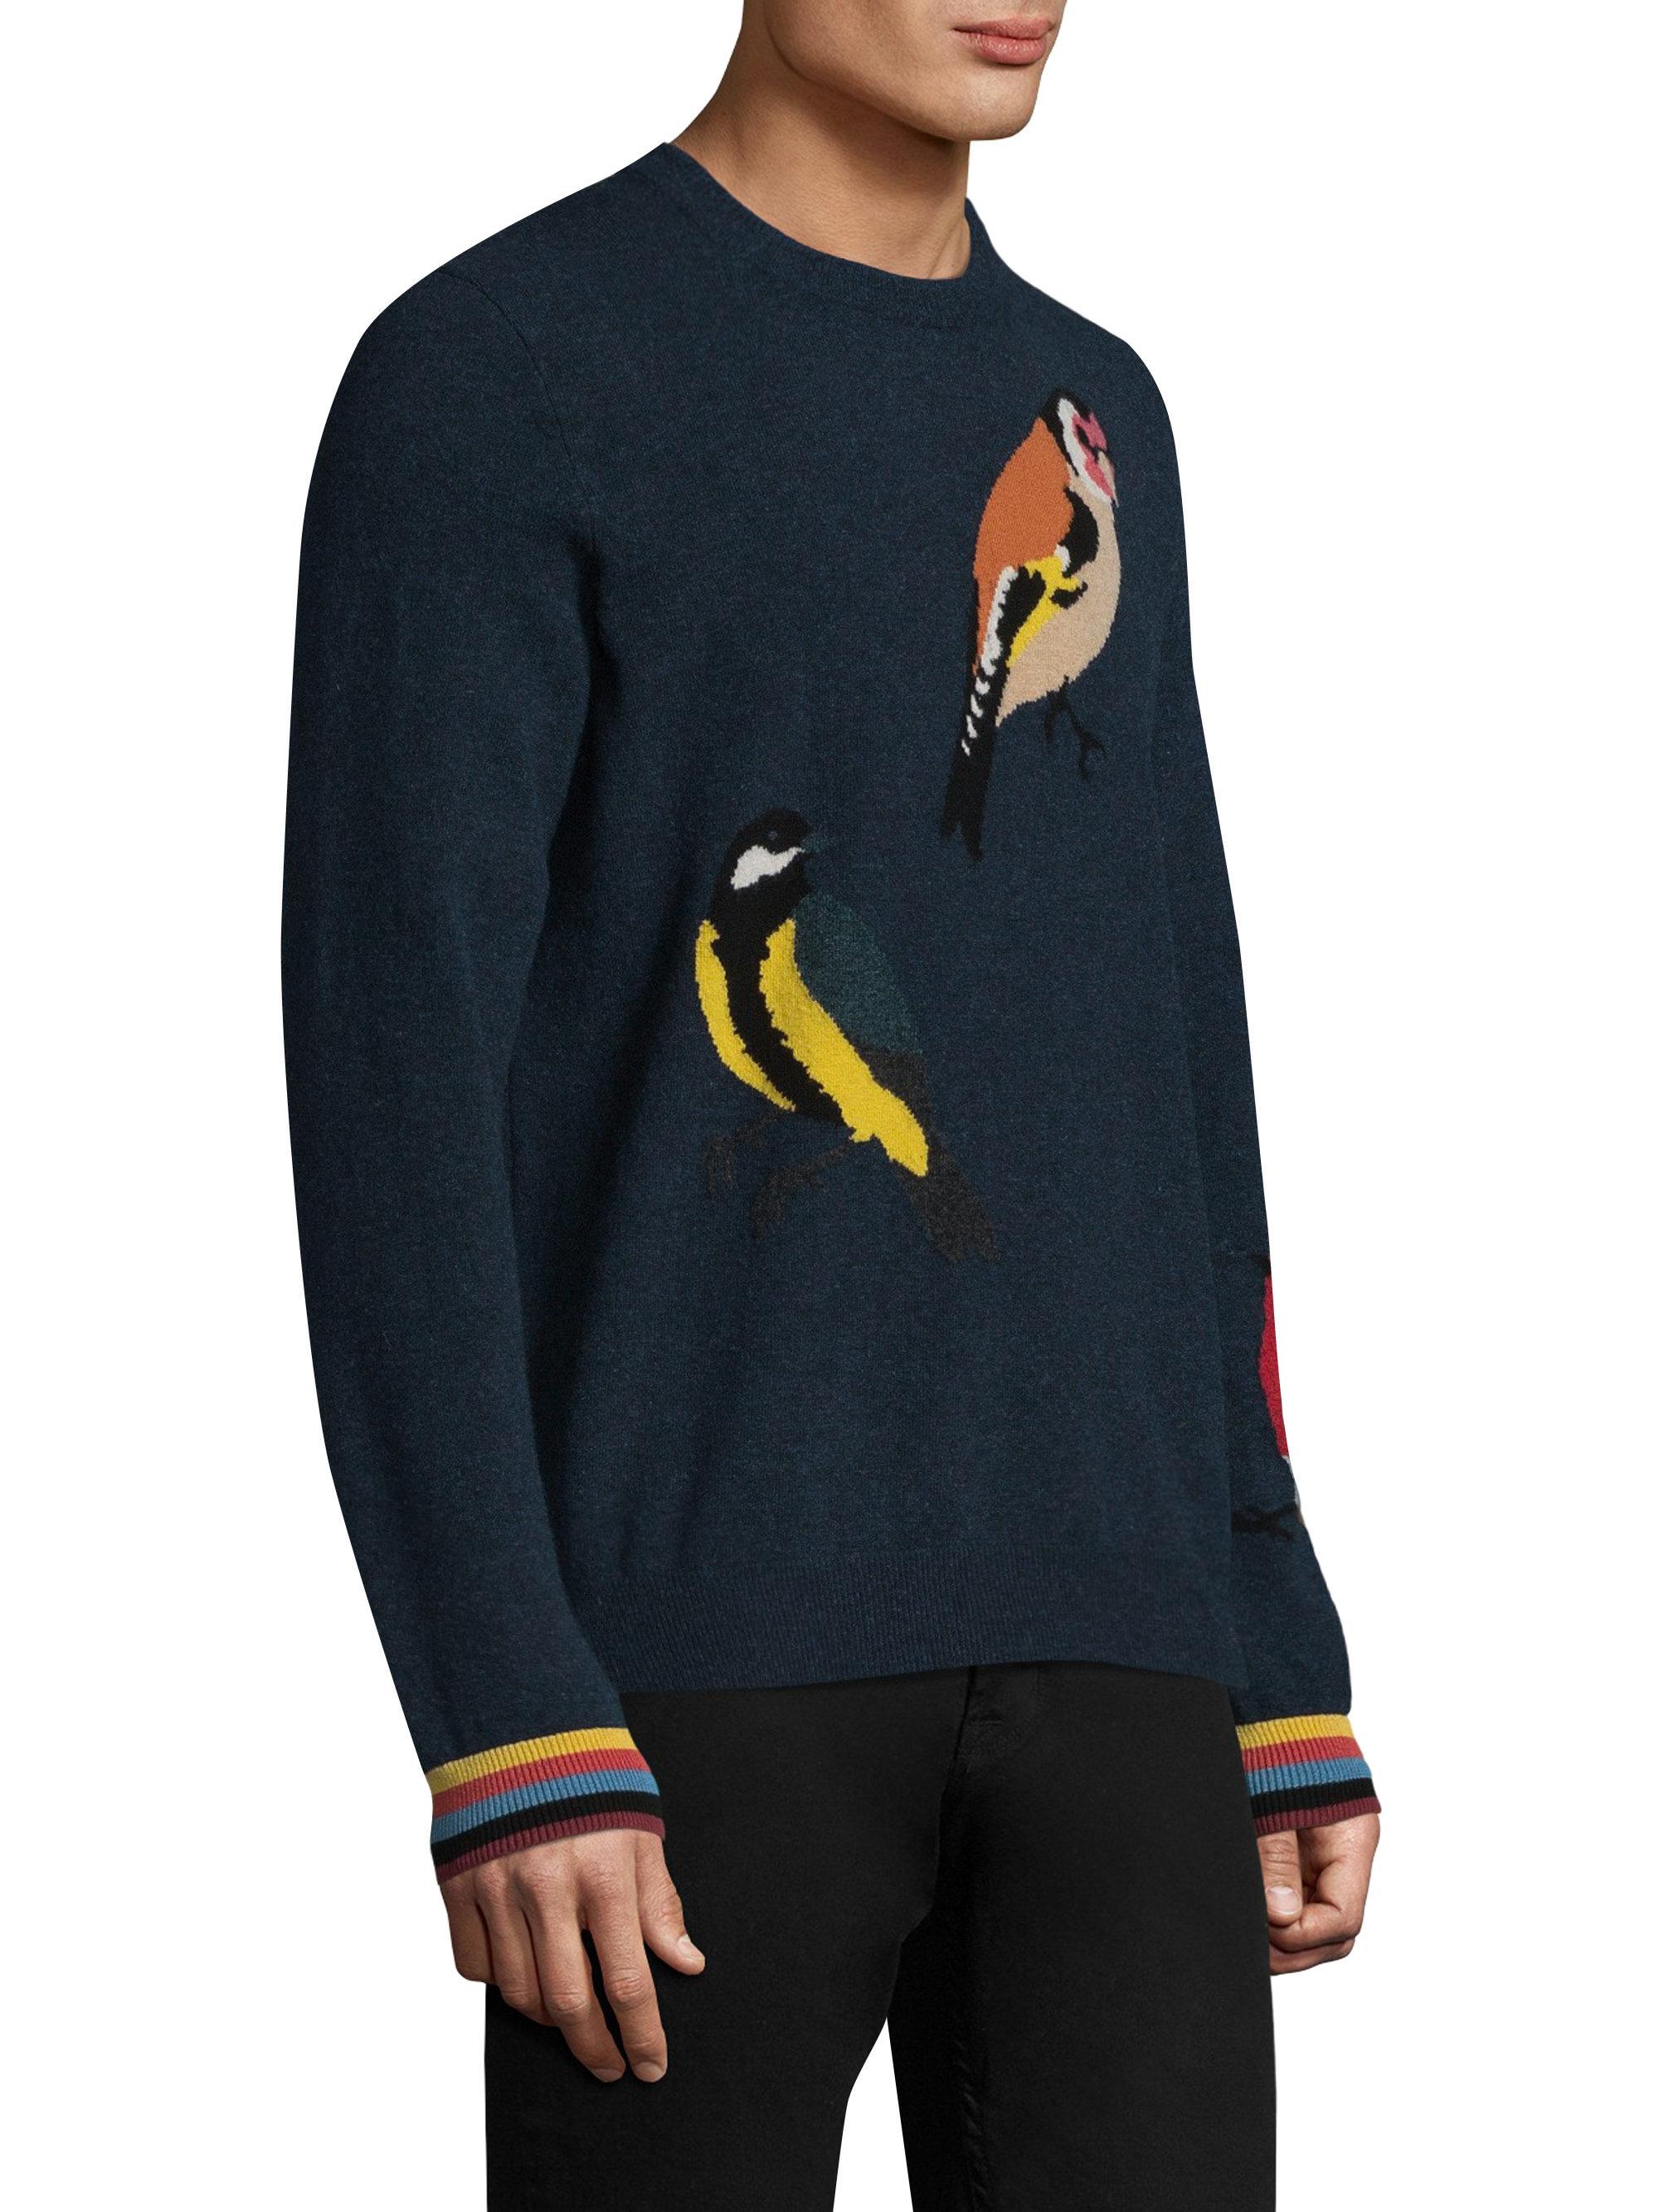 Paul Smith Wool Bird Knitted Sweater in Blue for Men - Lyst